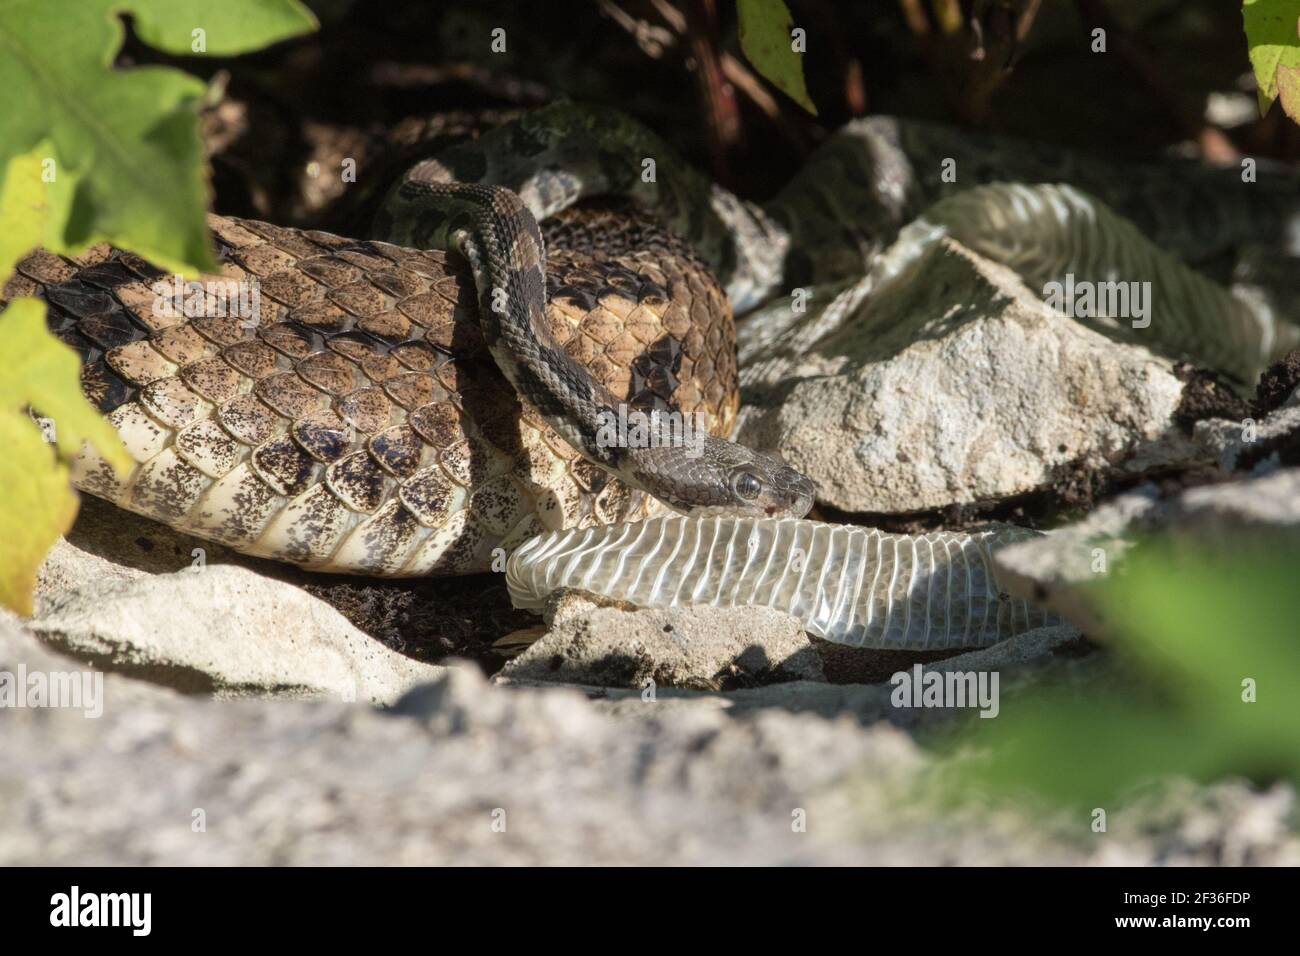 Close-up of newborn timber rattlesnake, Crotalus horridus, with the mother in the background. Stock Photo